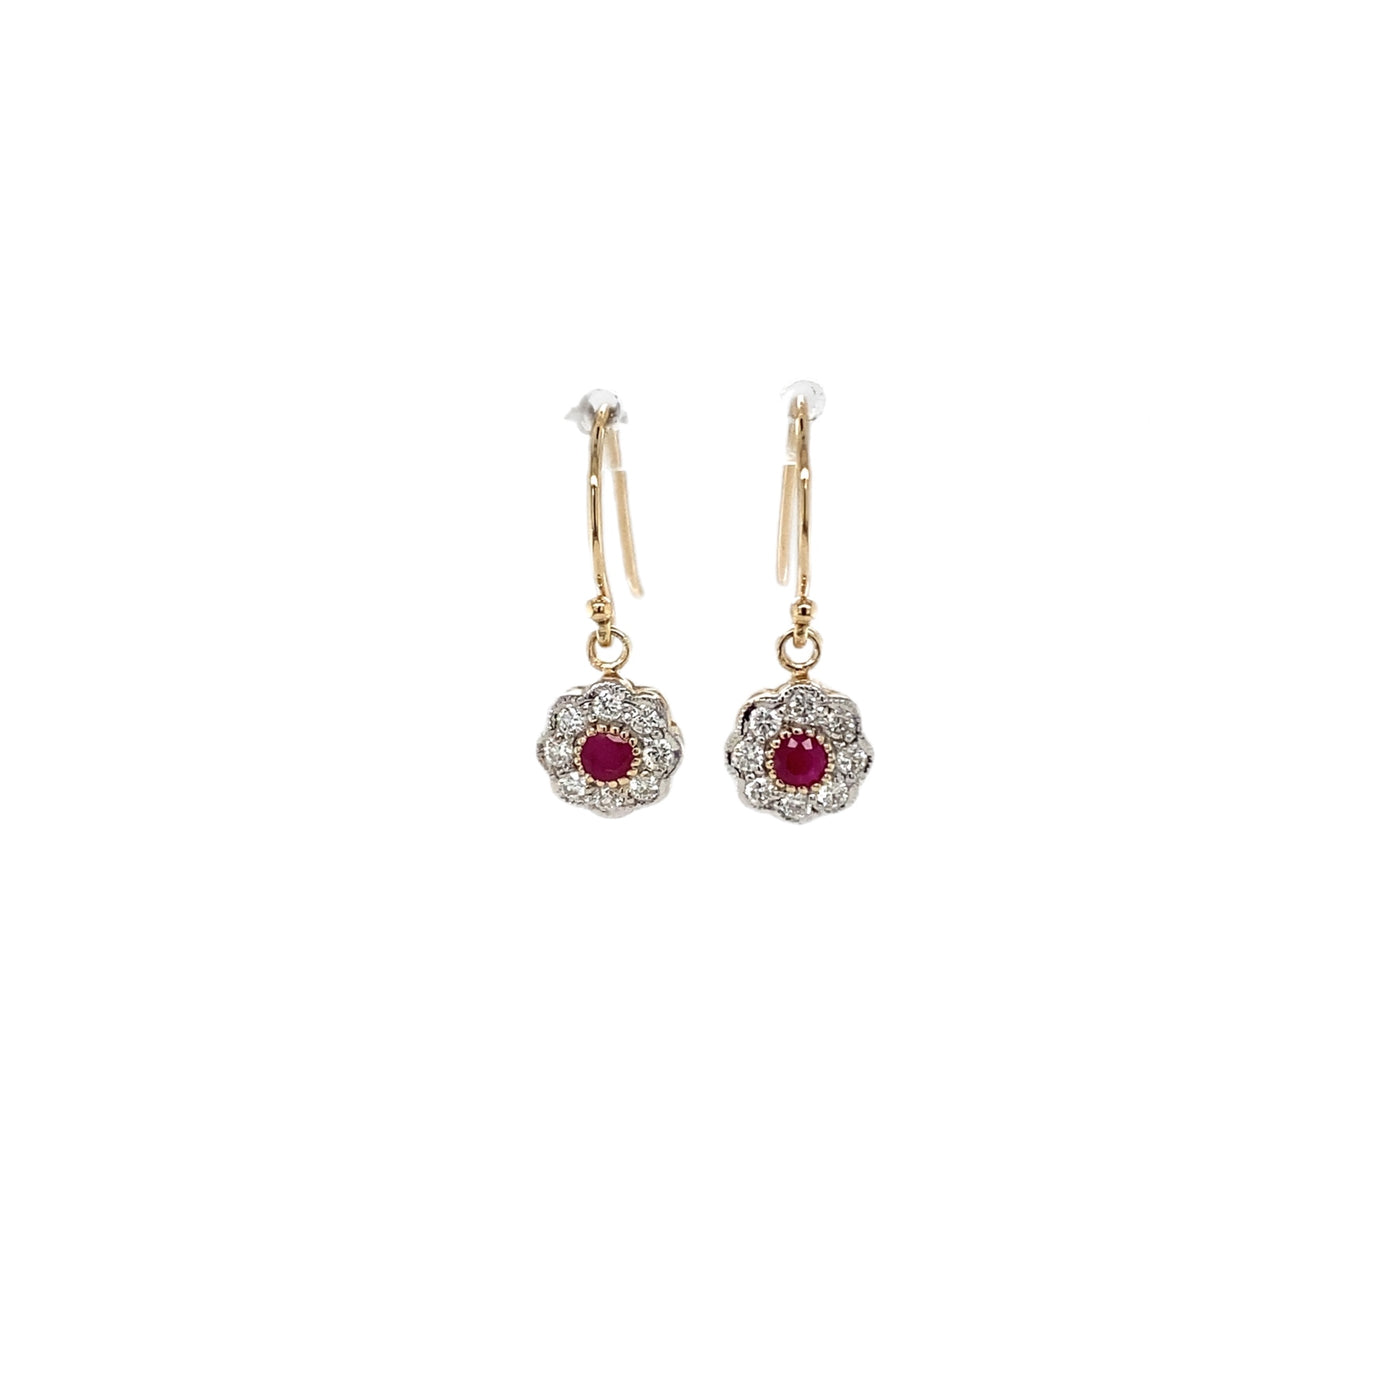 9ct yellow/white gold floral style natural ruby and natural diamond drop earrings